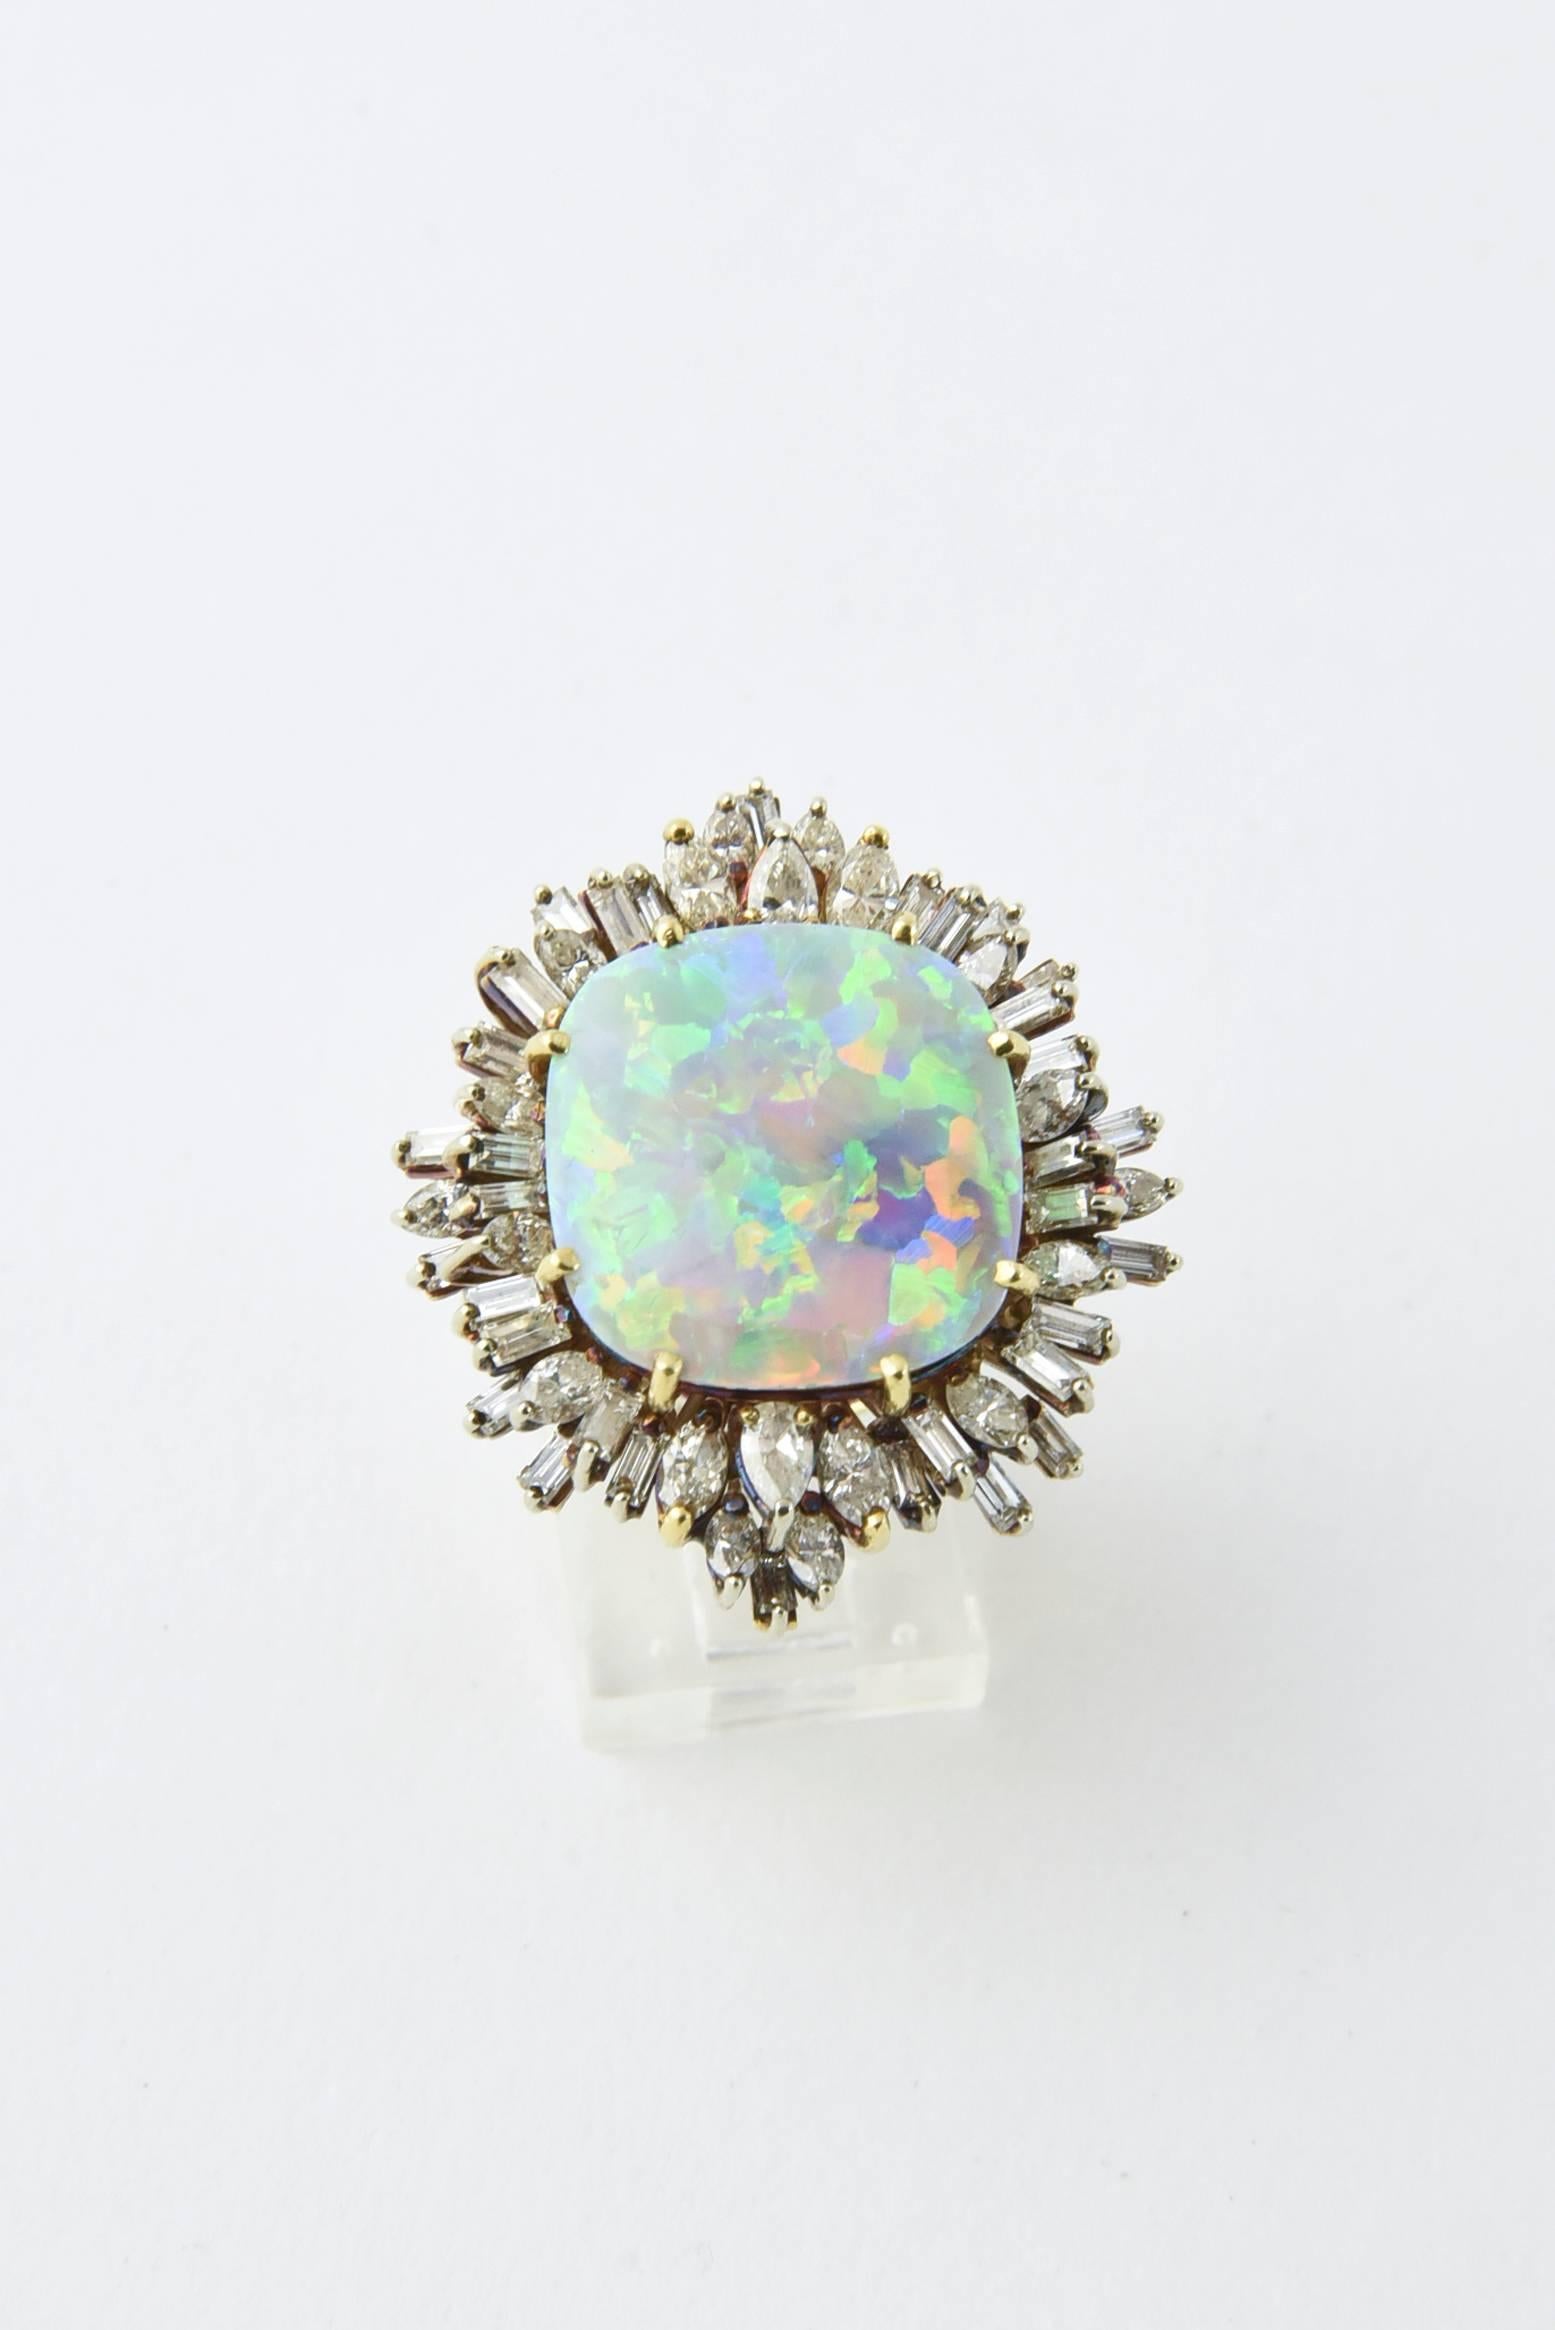 Square Cut Intense Gray Crystal Opal Diamond Gold Ring For Sale